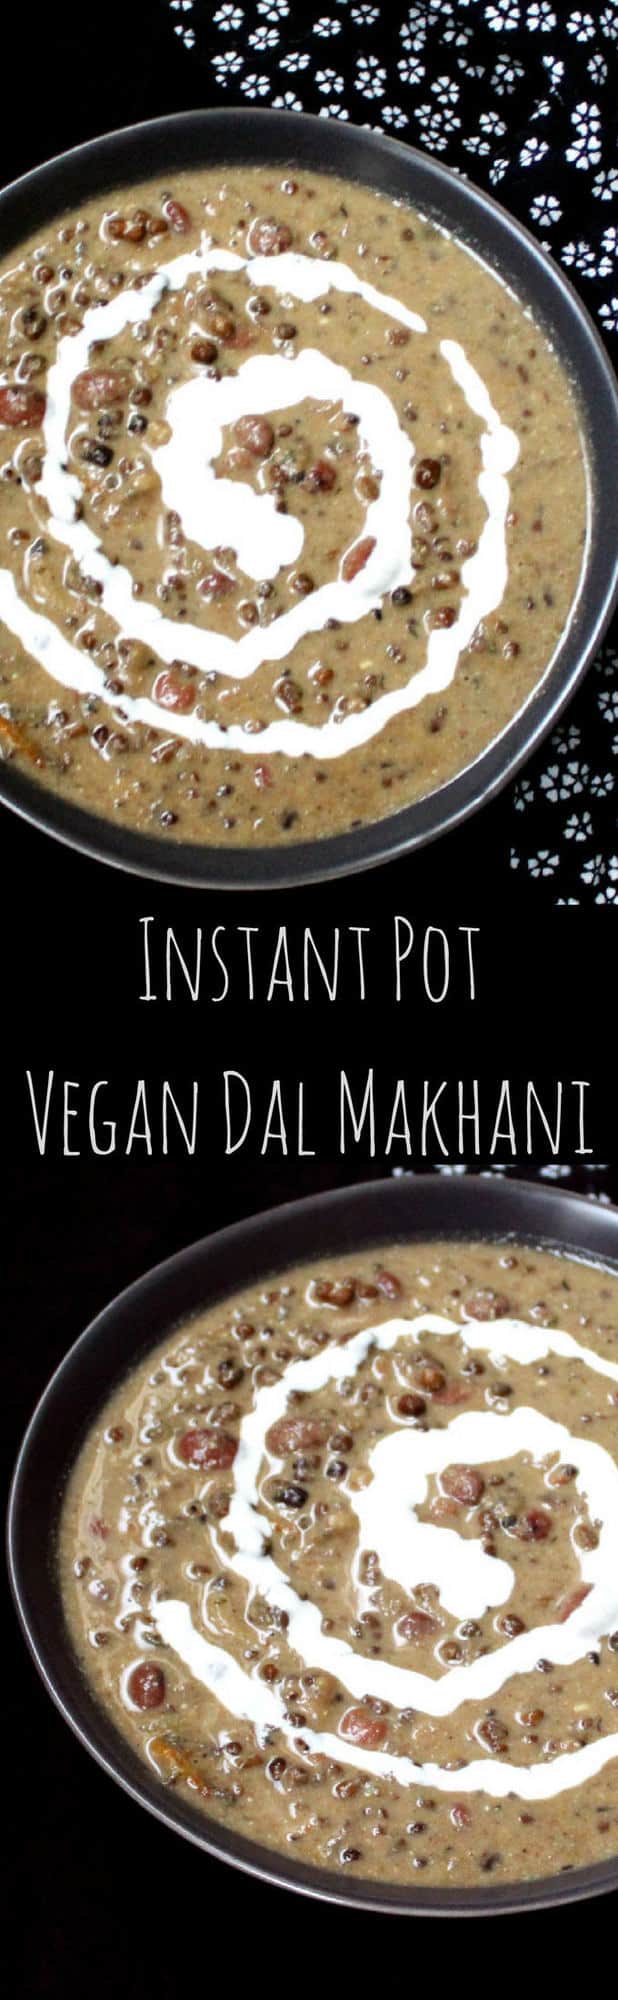 Instant Pot Makhani images with text inlay that says "instant pot vegan dal makhani"